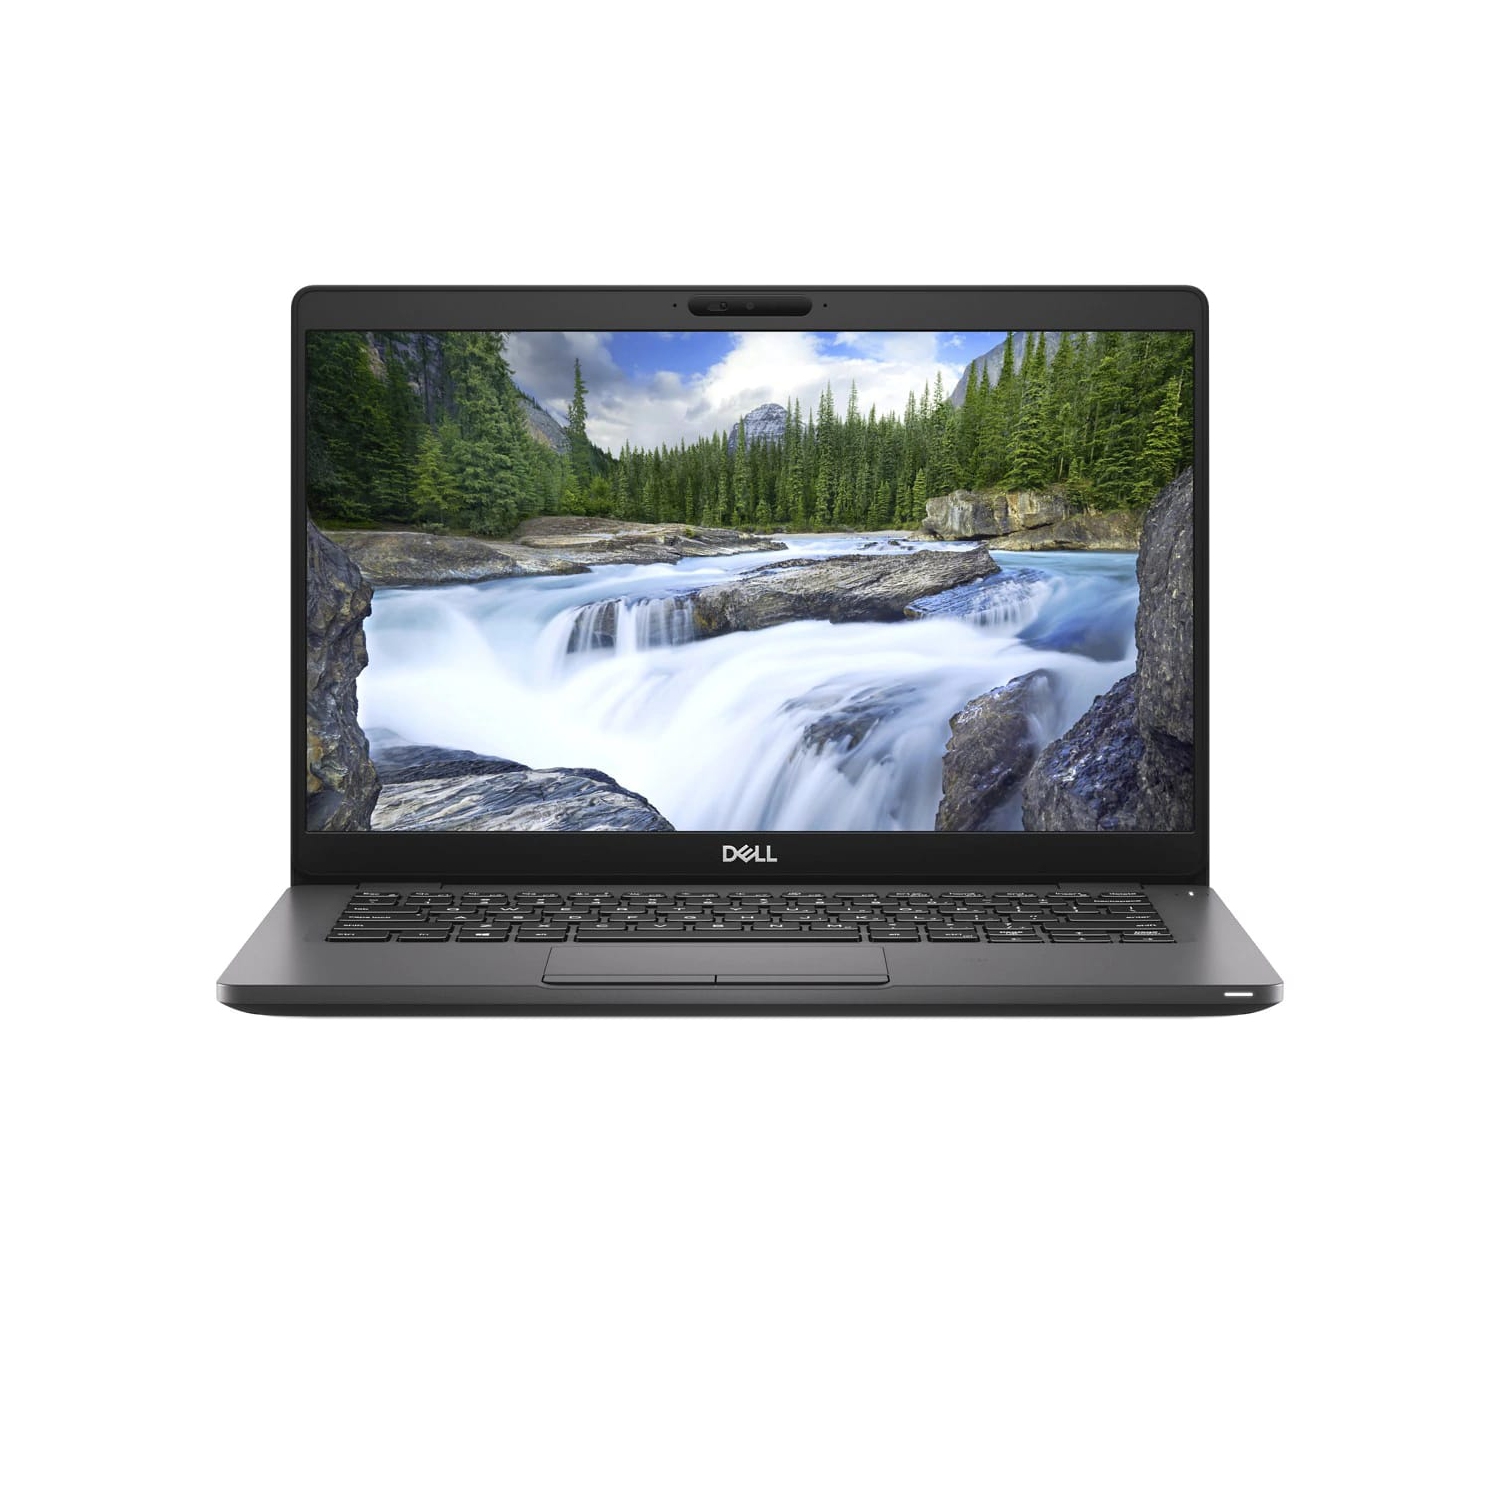 Refurbished (Excellent) - Dell Latitude 5000 5300 Laptop (2019) | 13.3" HD | Core i5 - 256GB SSD - 16GB RAM | 4 Cores @ 3.9 GHz Certified Refurbished